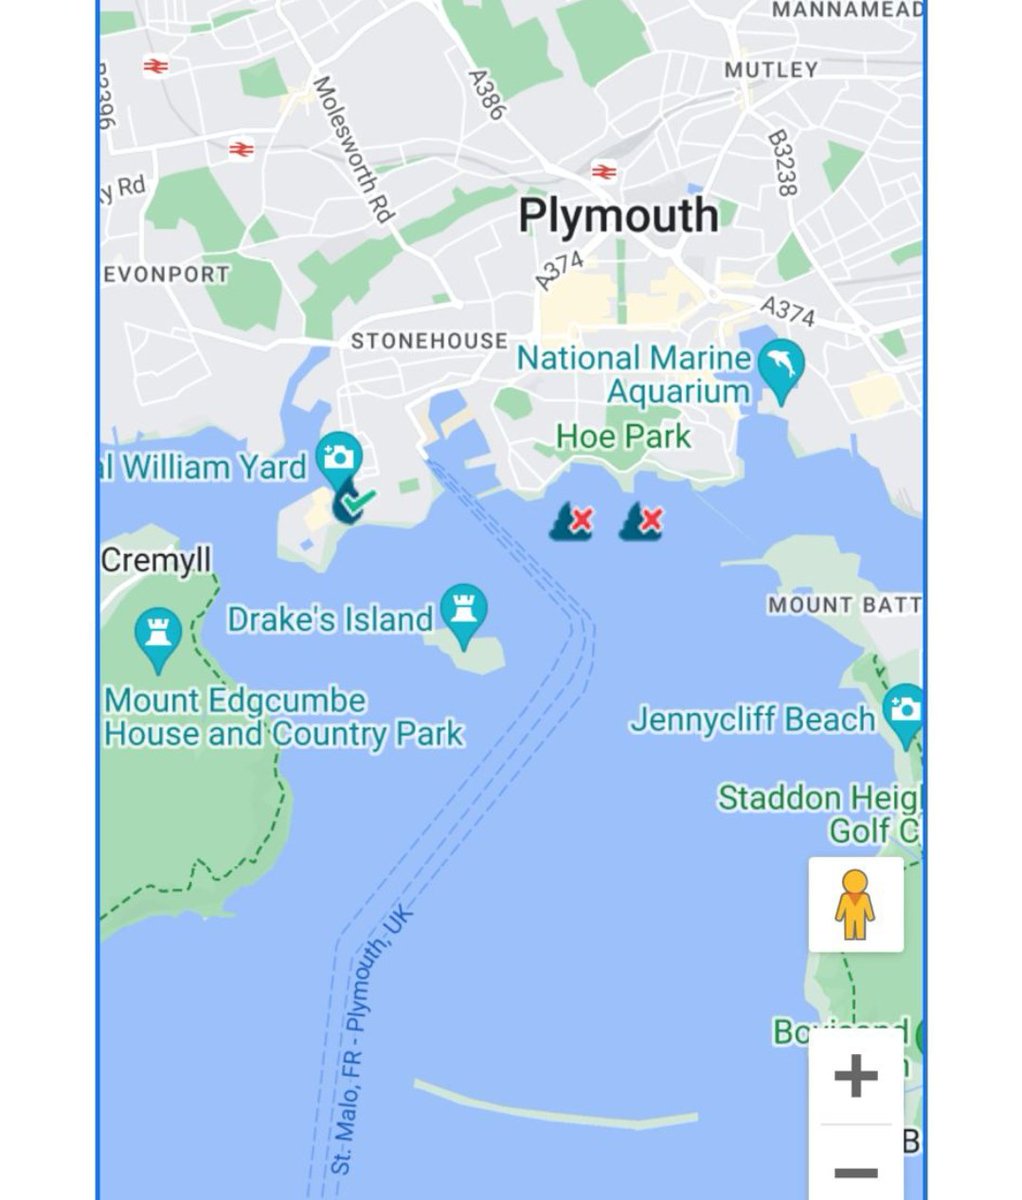 I'm supposed to be swimming with a group today at Hoe Park as part of an event. This is deplorable. It's almost like a loosening of regulations has been exploited for profit over service... At what point do we revolt over this revolting situation @SouthWestWater @SWWHelp